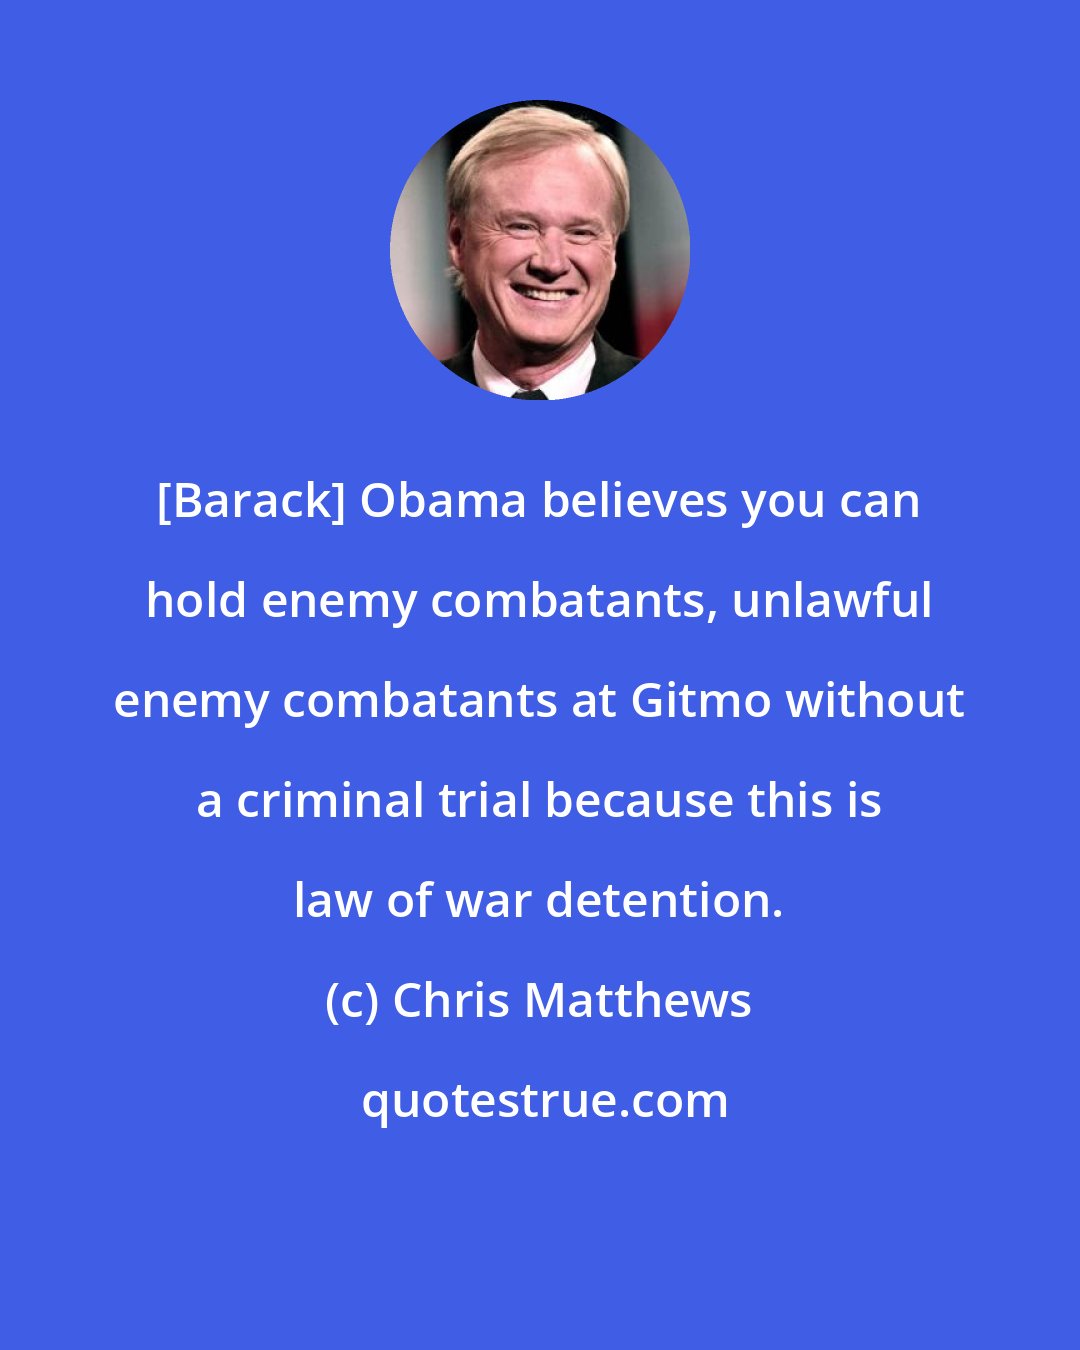 Chris Matthews: [Barack] Obama believes you can hold enemy combatants, unlawful enemy combatants at Gitmo without a criminal trial because this is law of war detention.